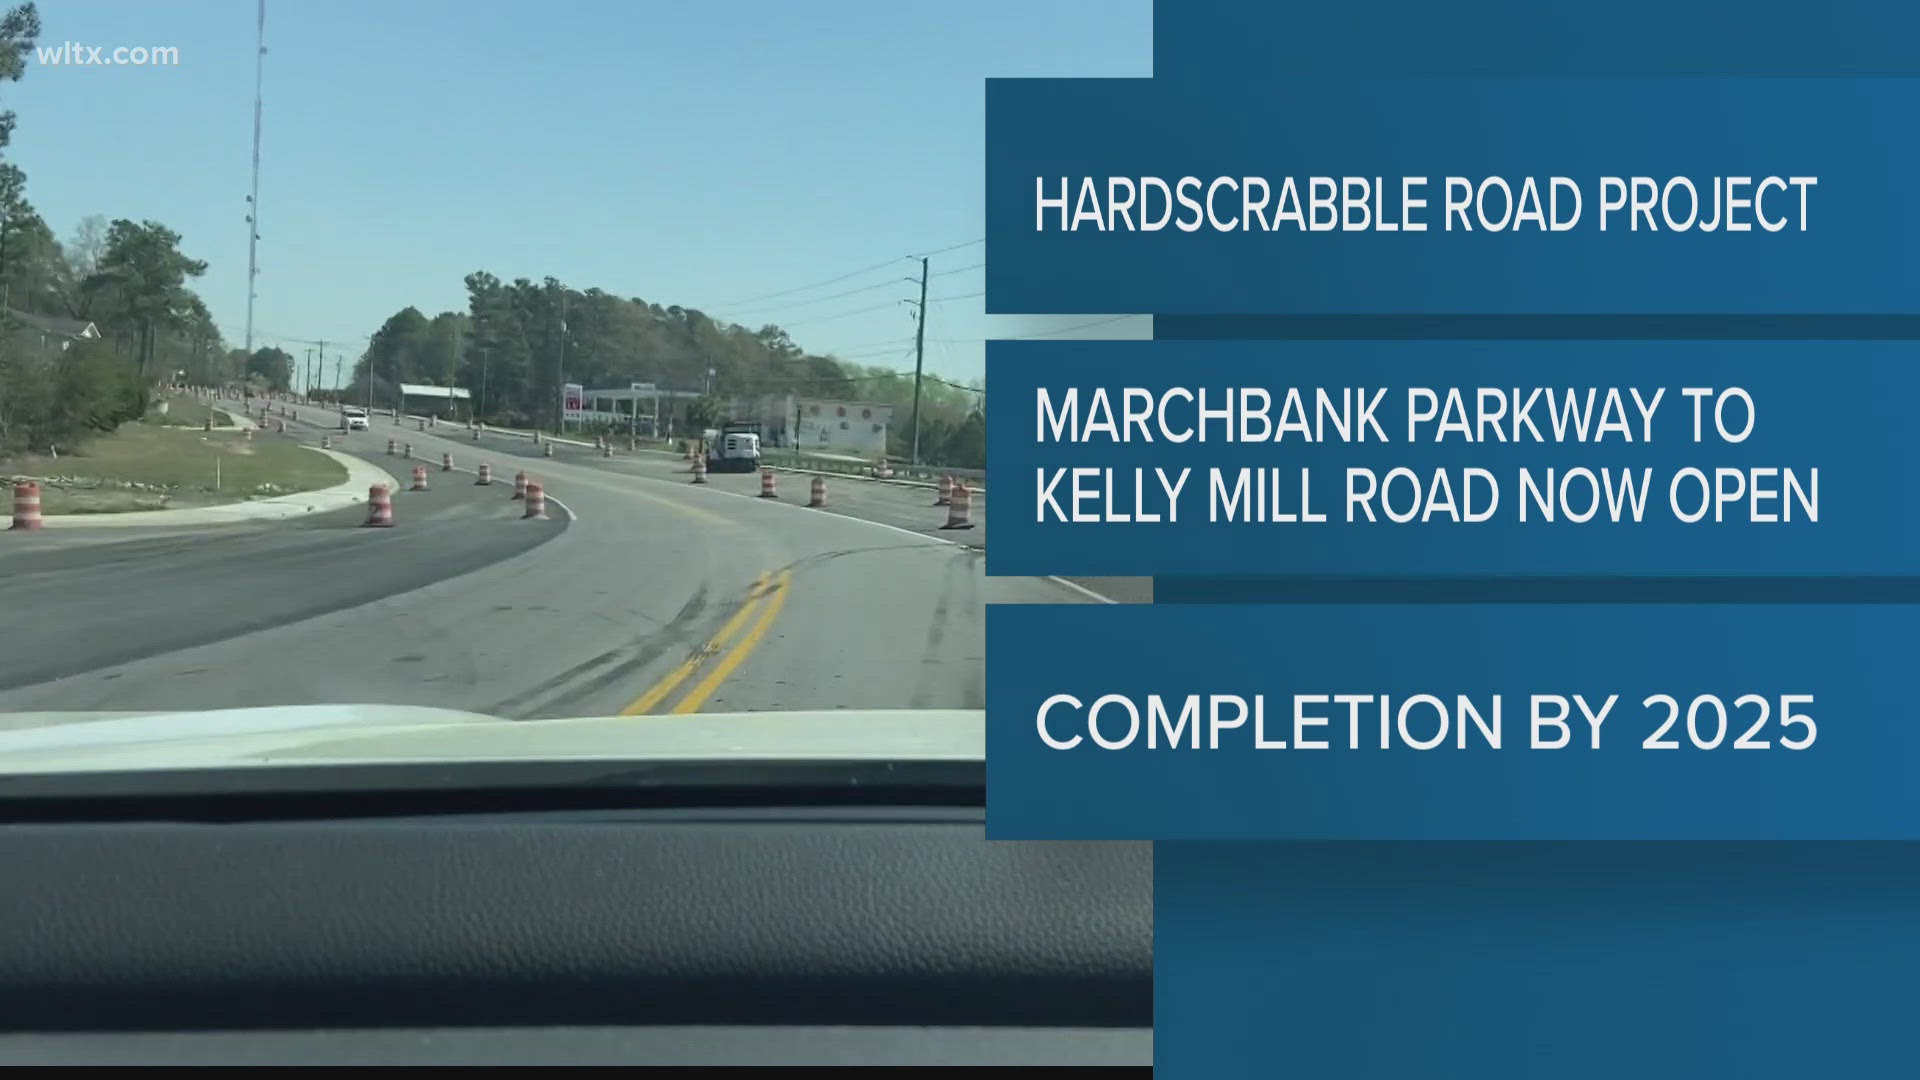 SCDOT announced just hours ago that 2.3 miles of the project from Marchbank Parkway to Kelly Mill road is now open.